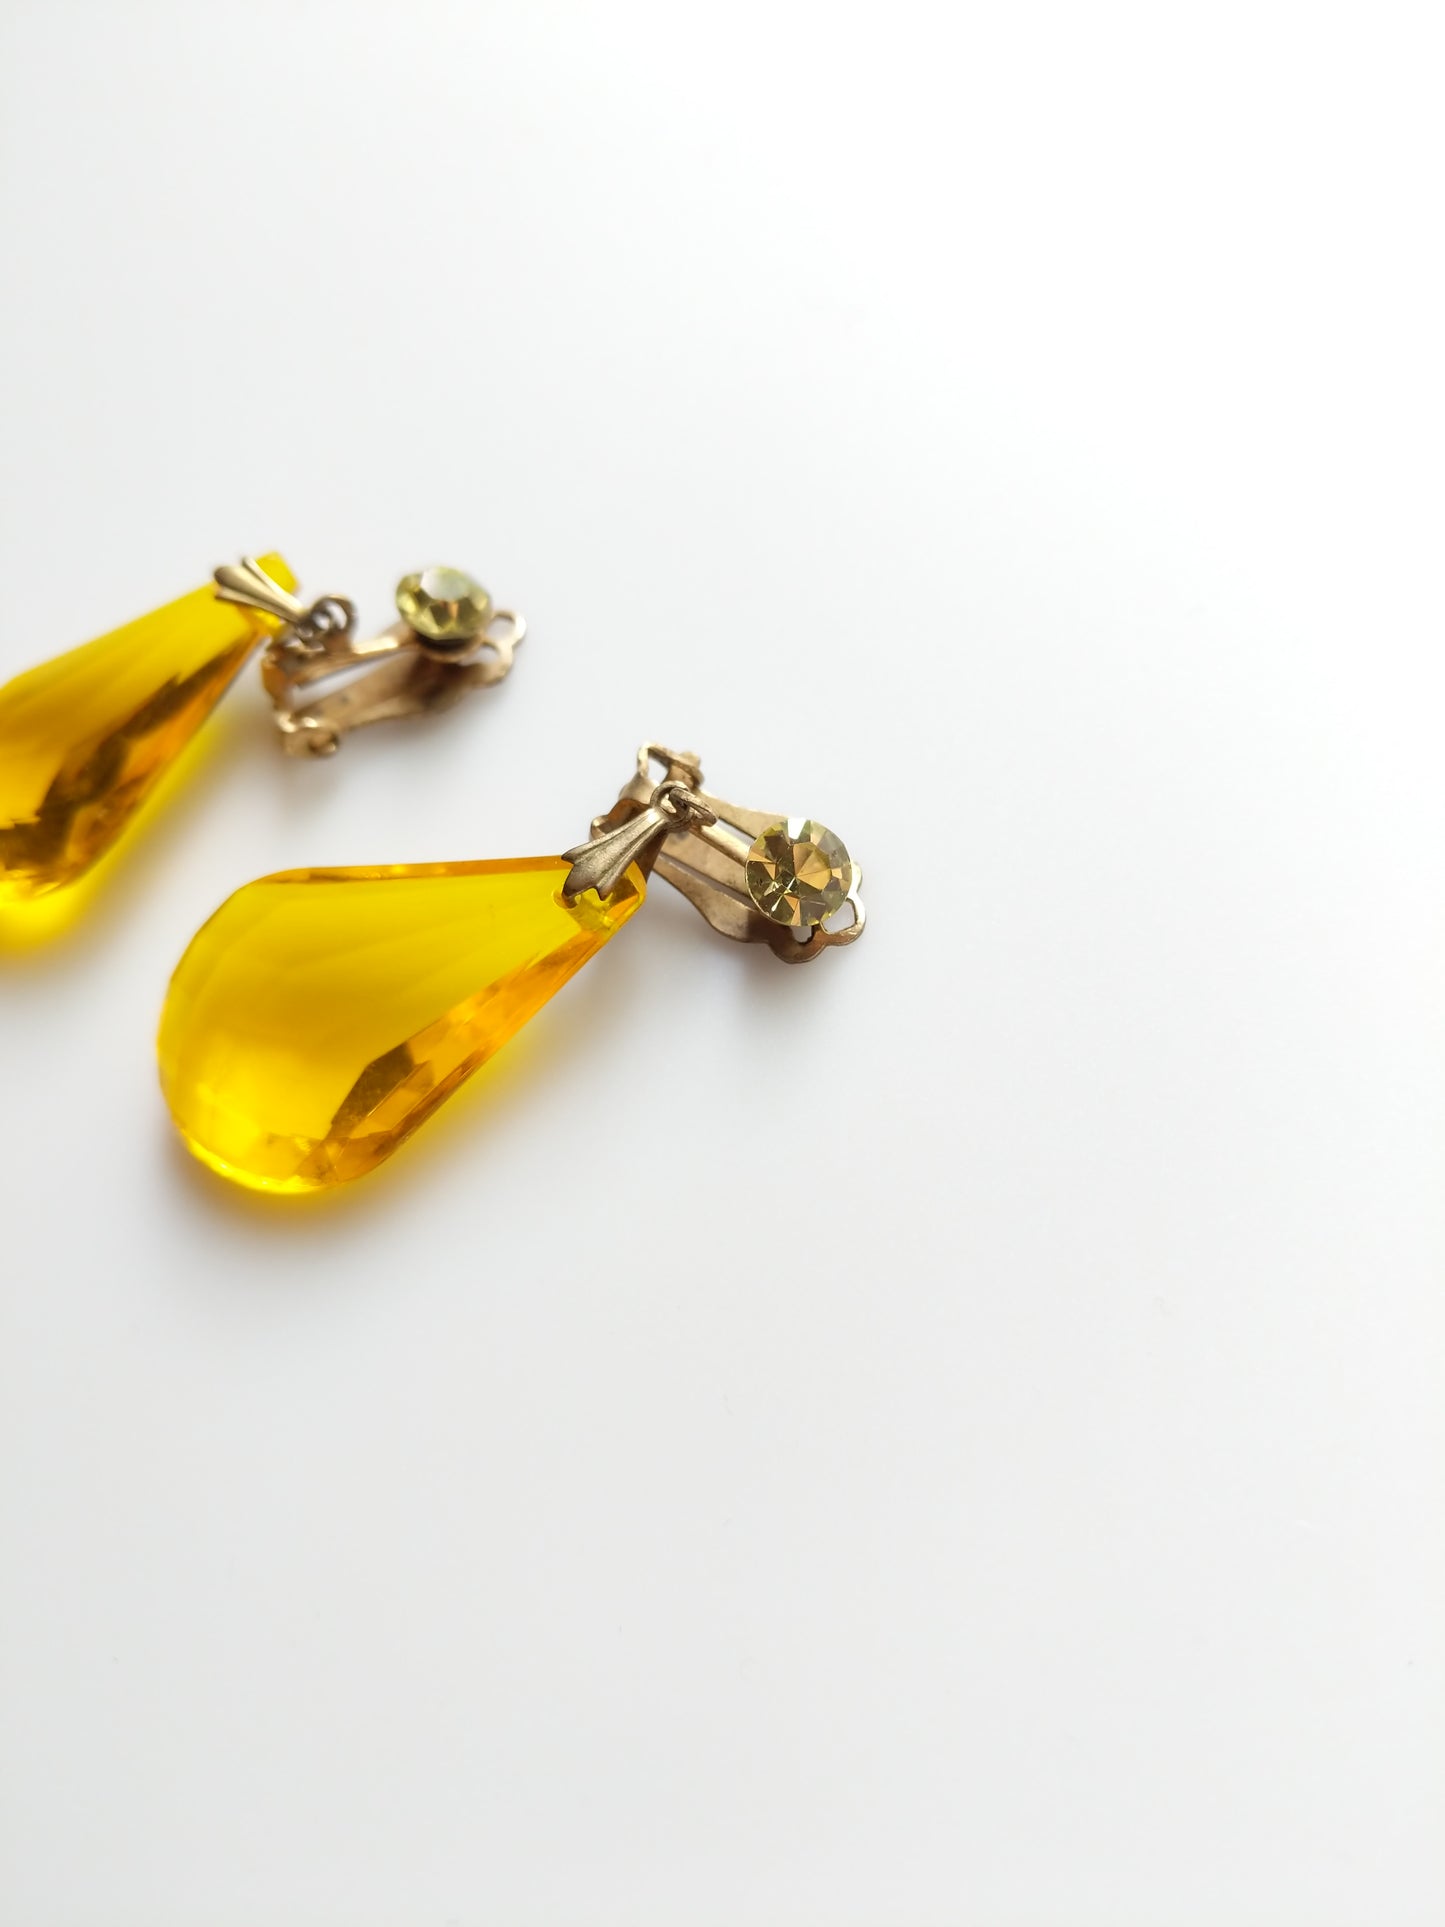 Vintage Drop Earrings - Citrine Color w/ Rhinestone Accent